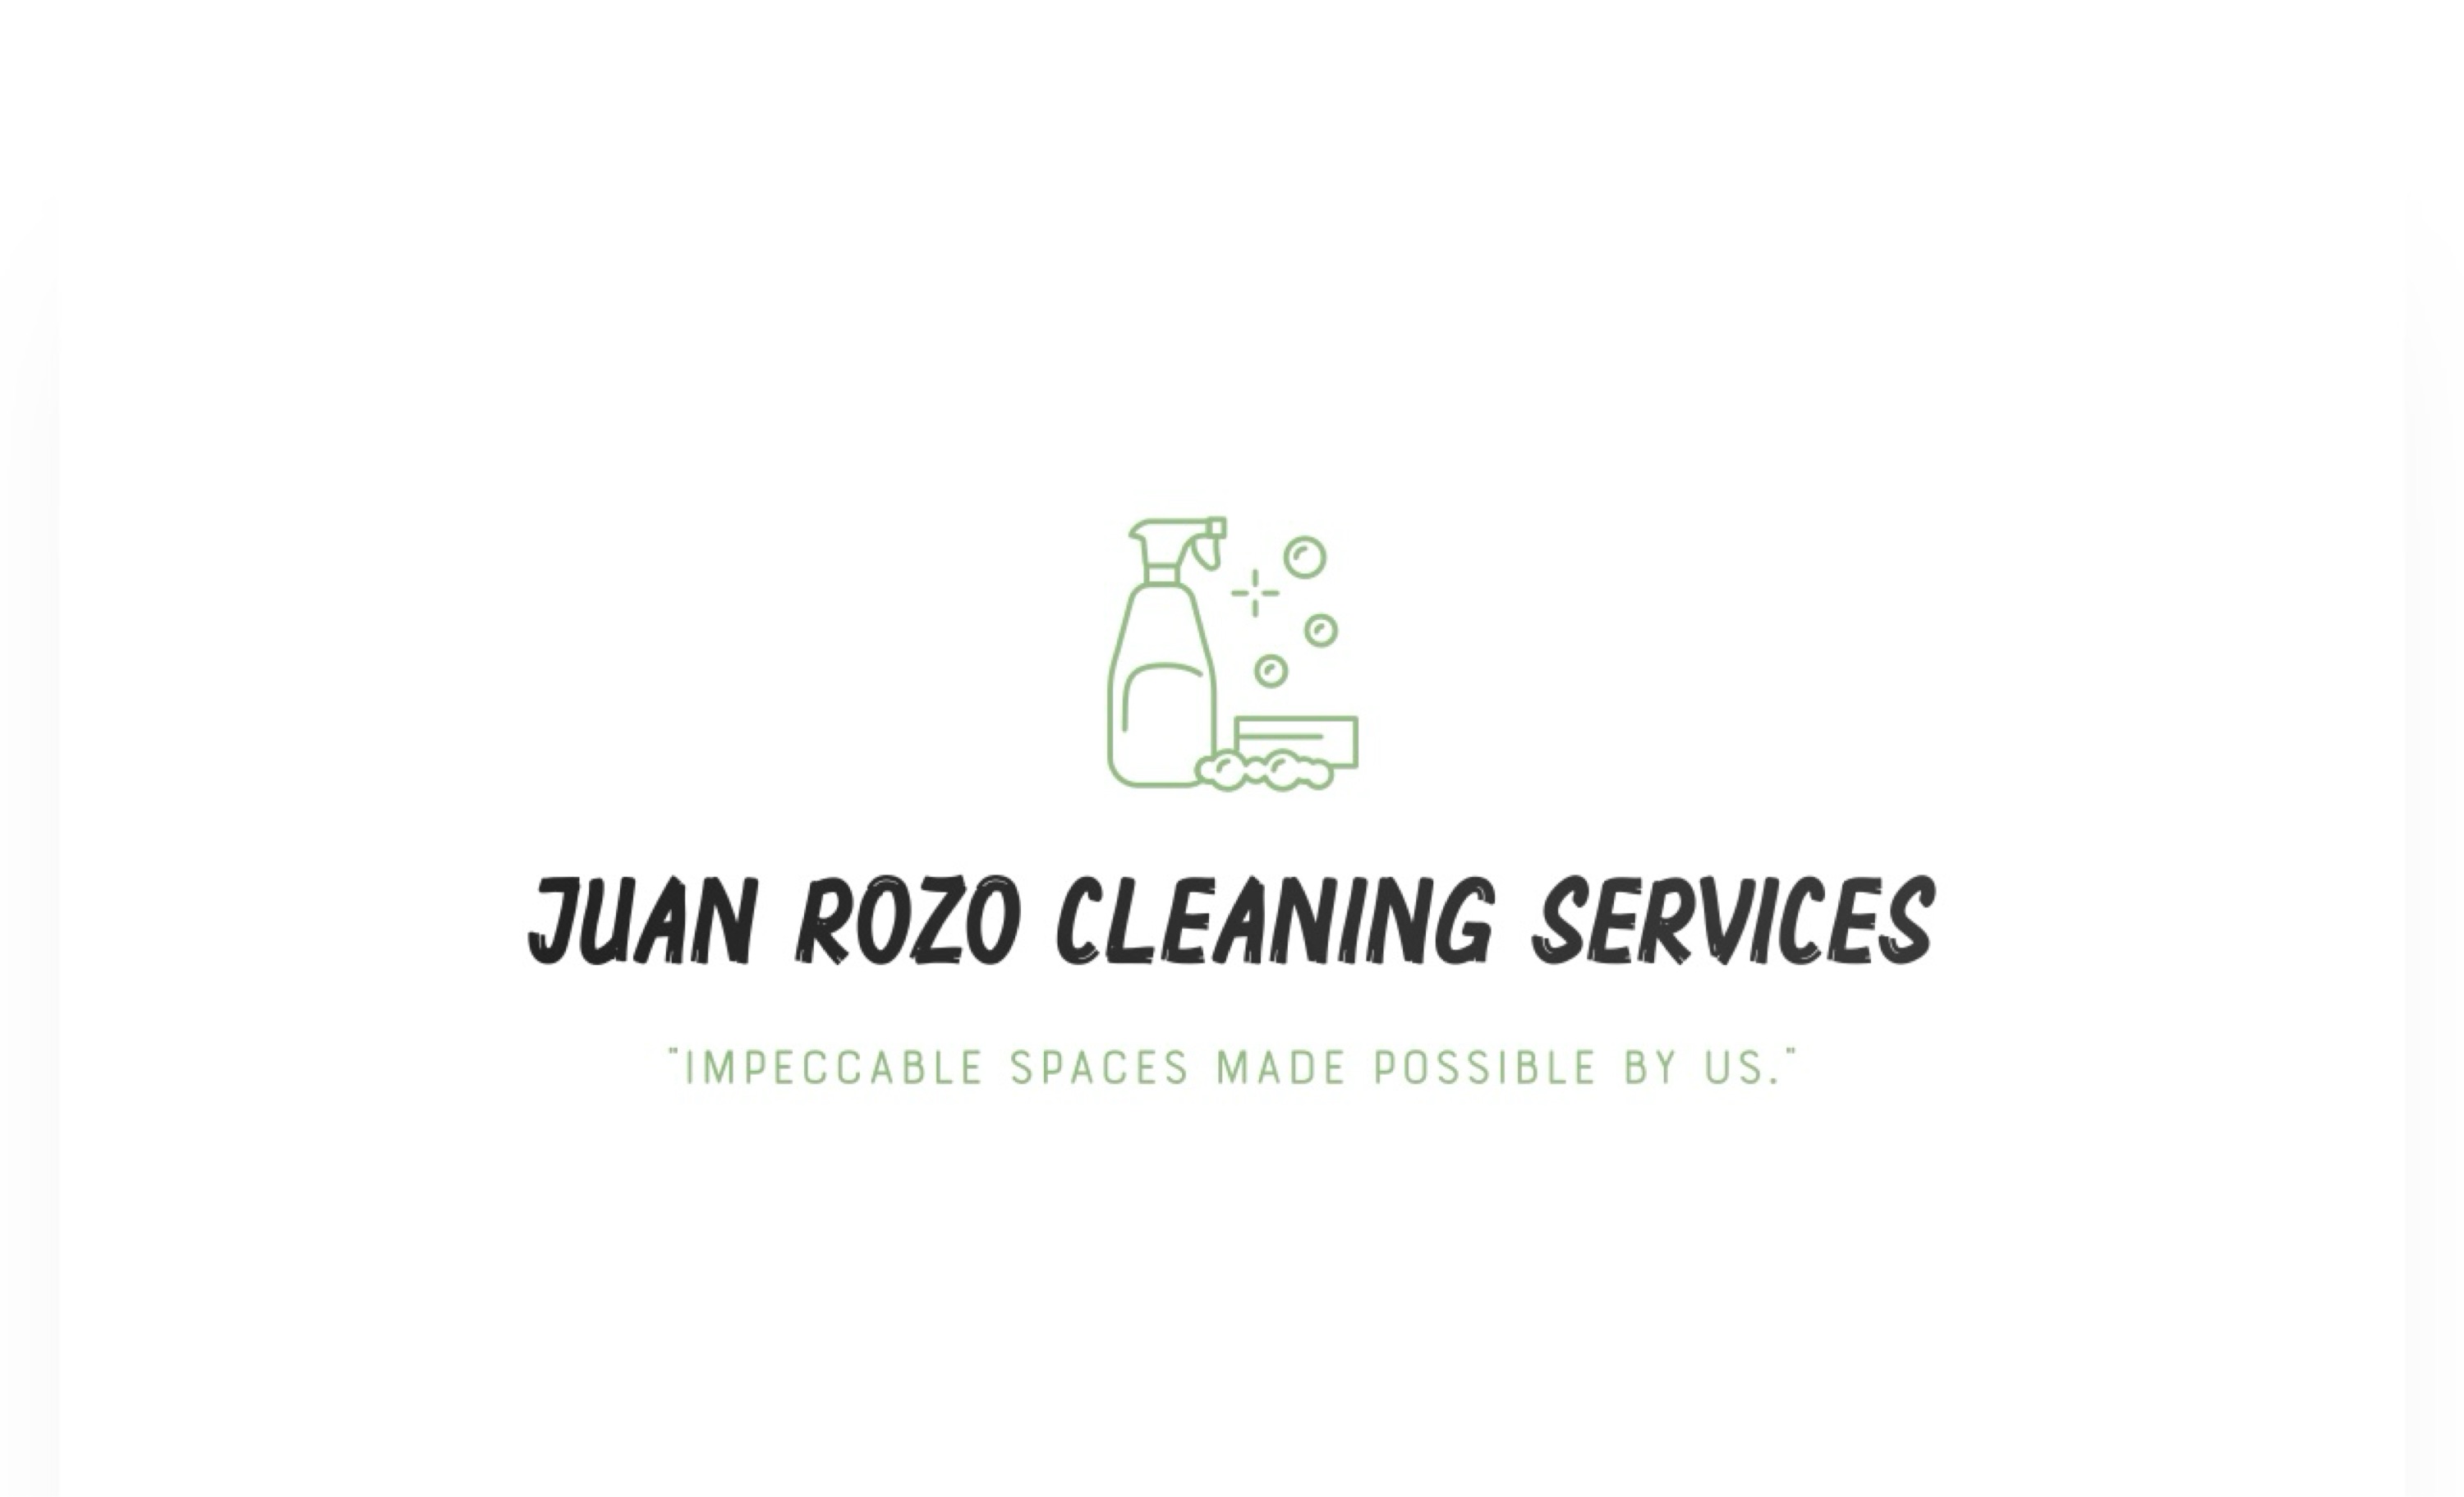 Juan Rozo's Cleaning Services Logo